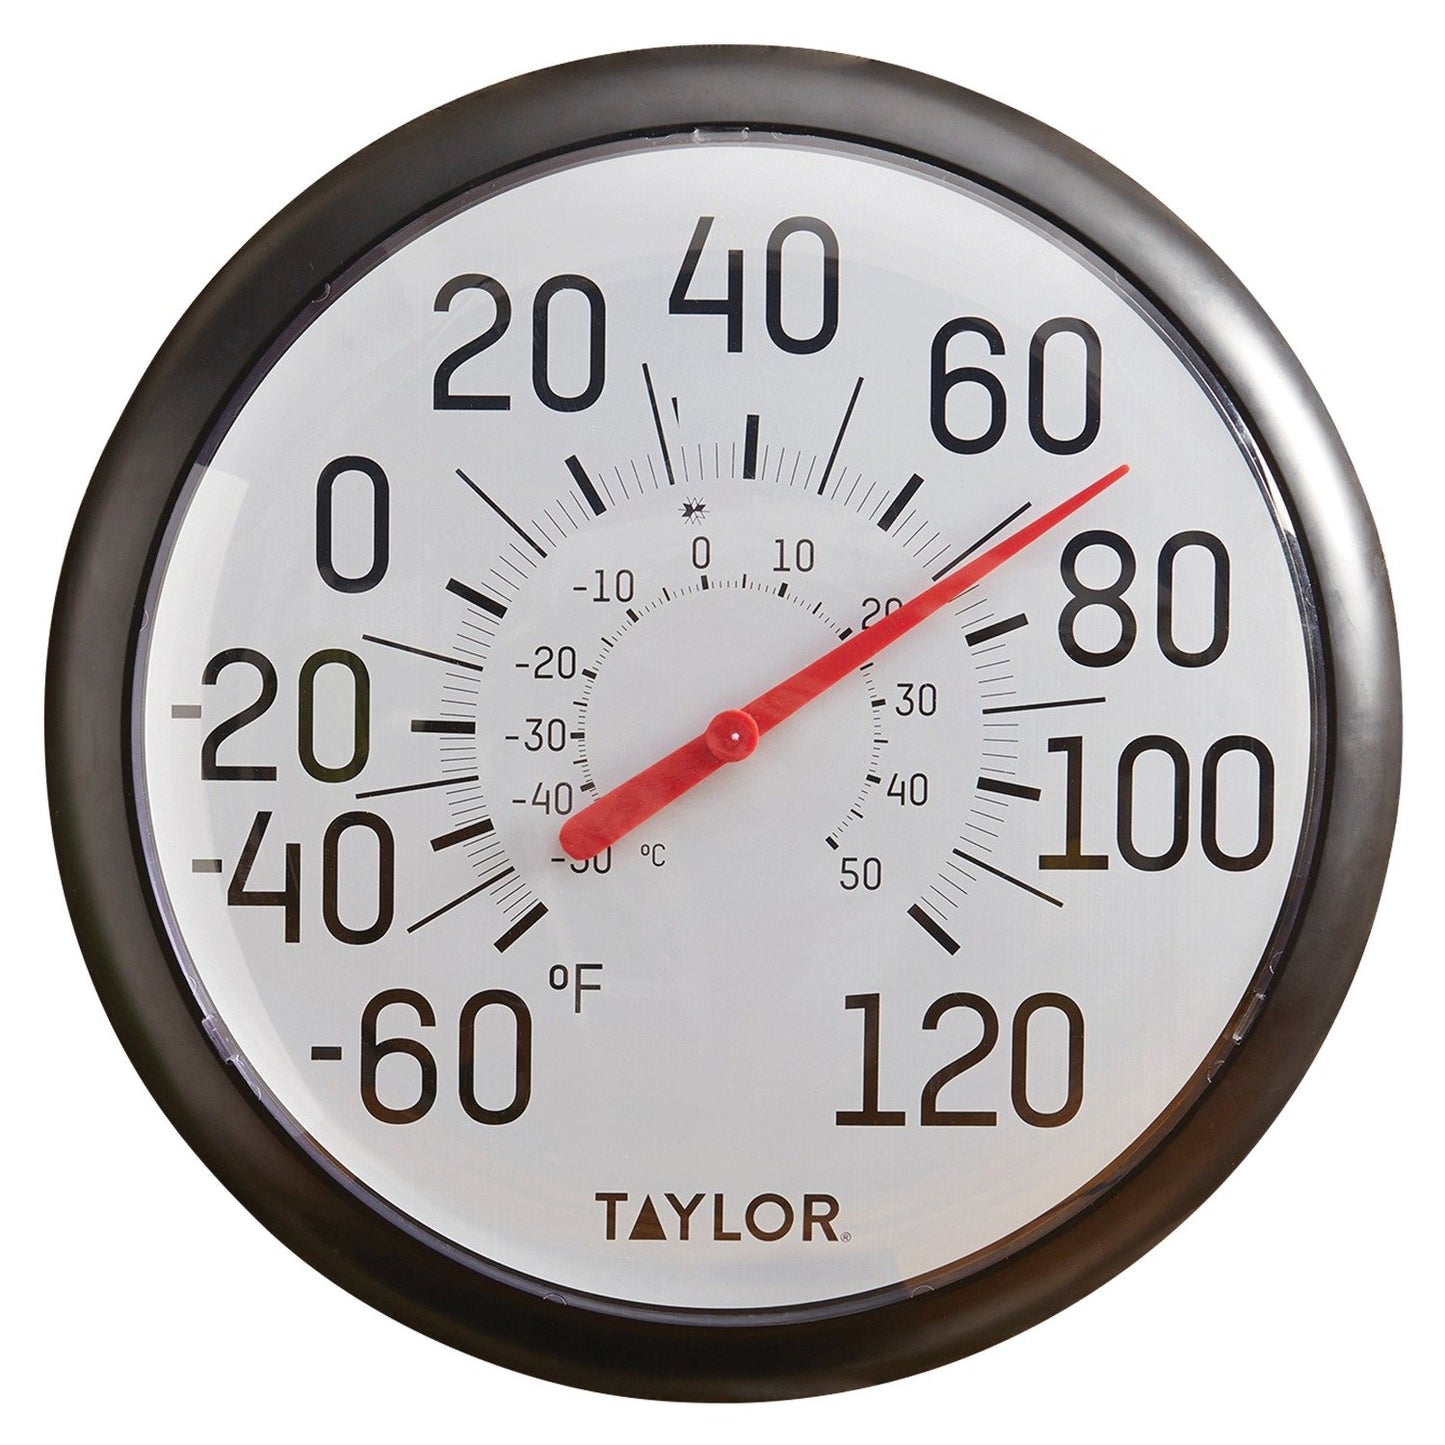 TAYLOR 6700 13.25" Ez Read Dial Thermometer